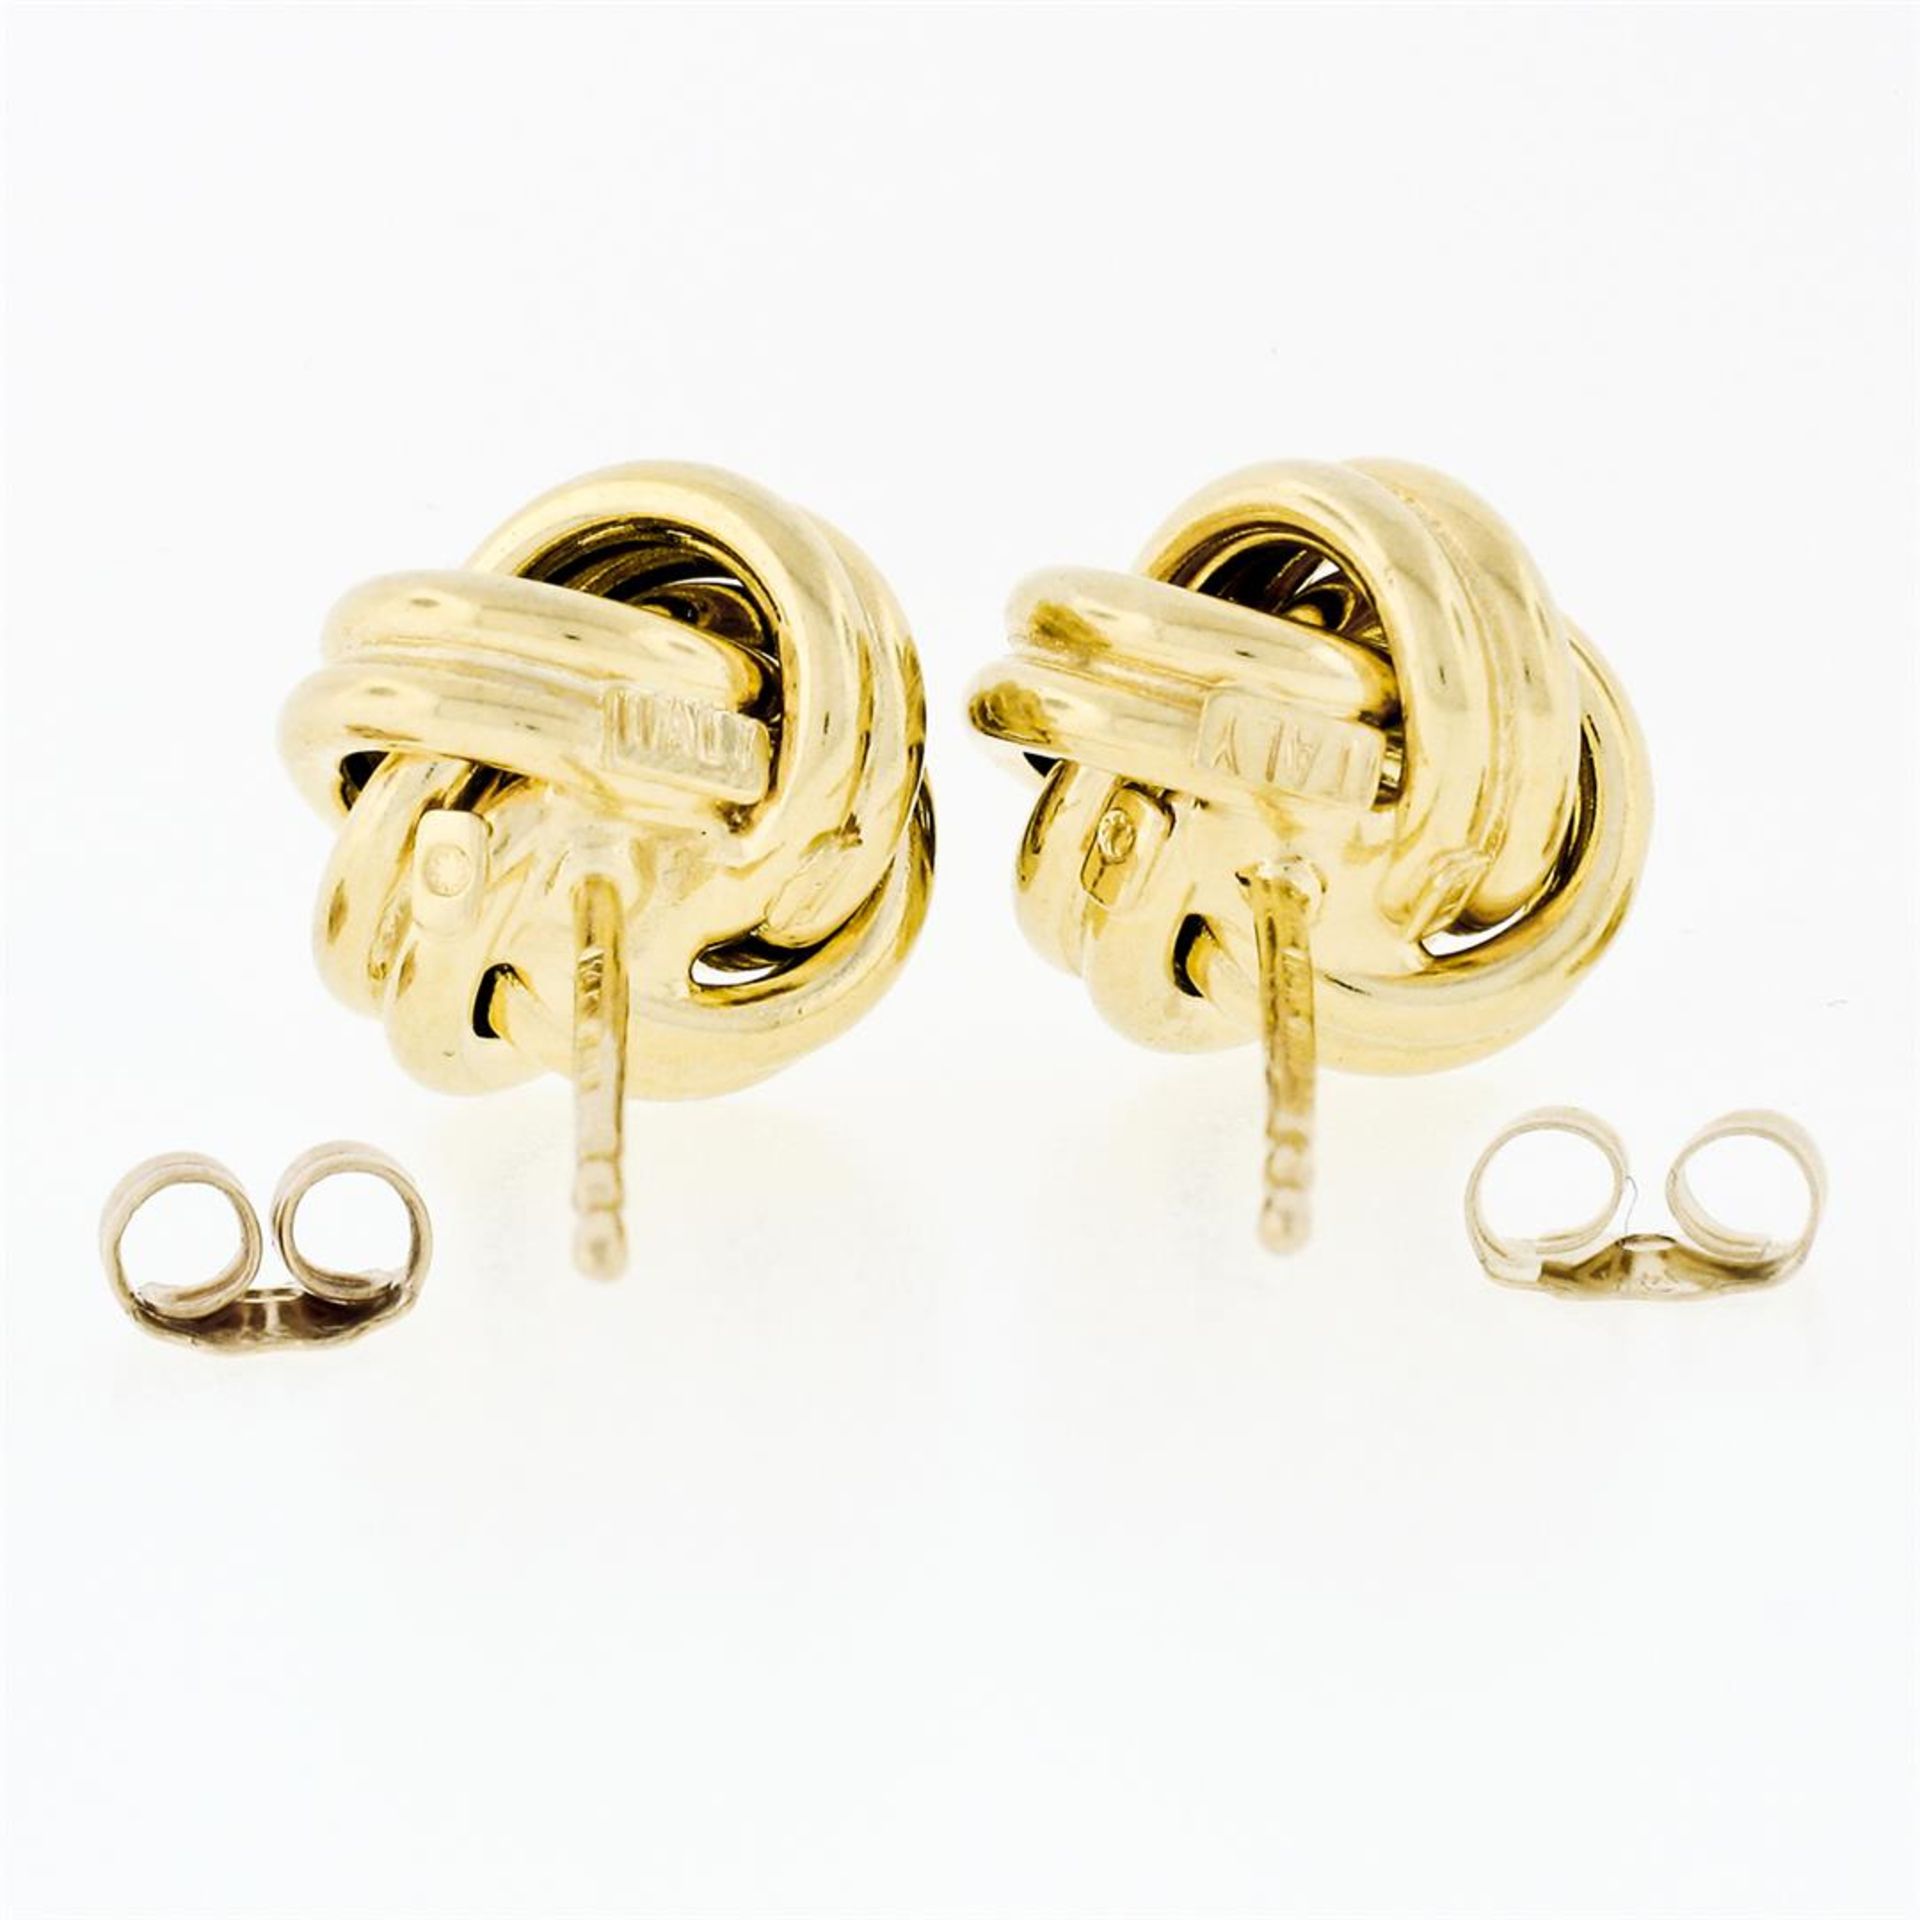 Italian 14K Yellow Gold Ribbed High Polished Dual Tube Love Knot Stud Earrings - Image 4 of 6